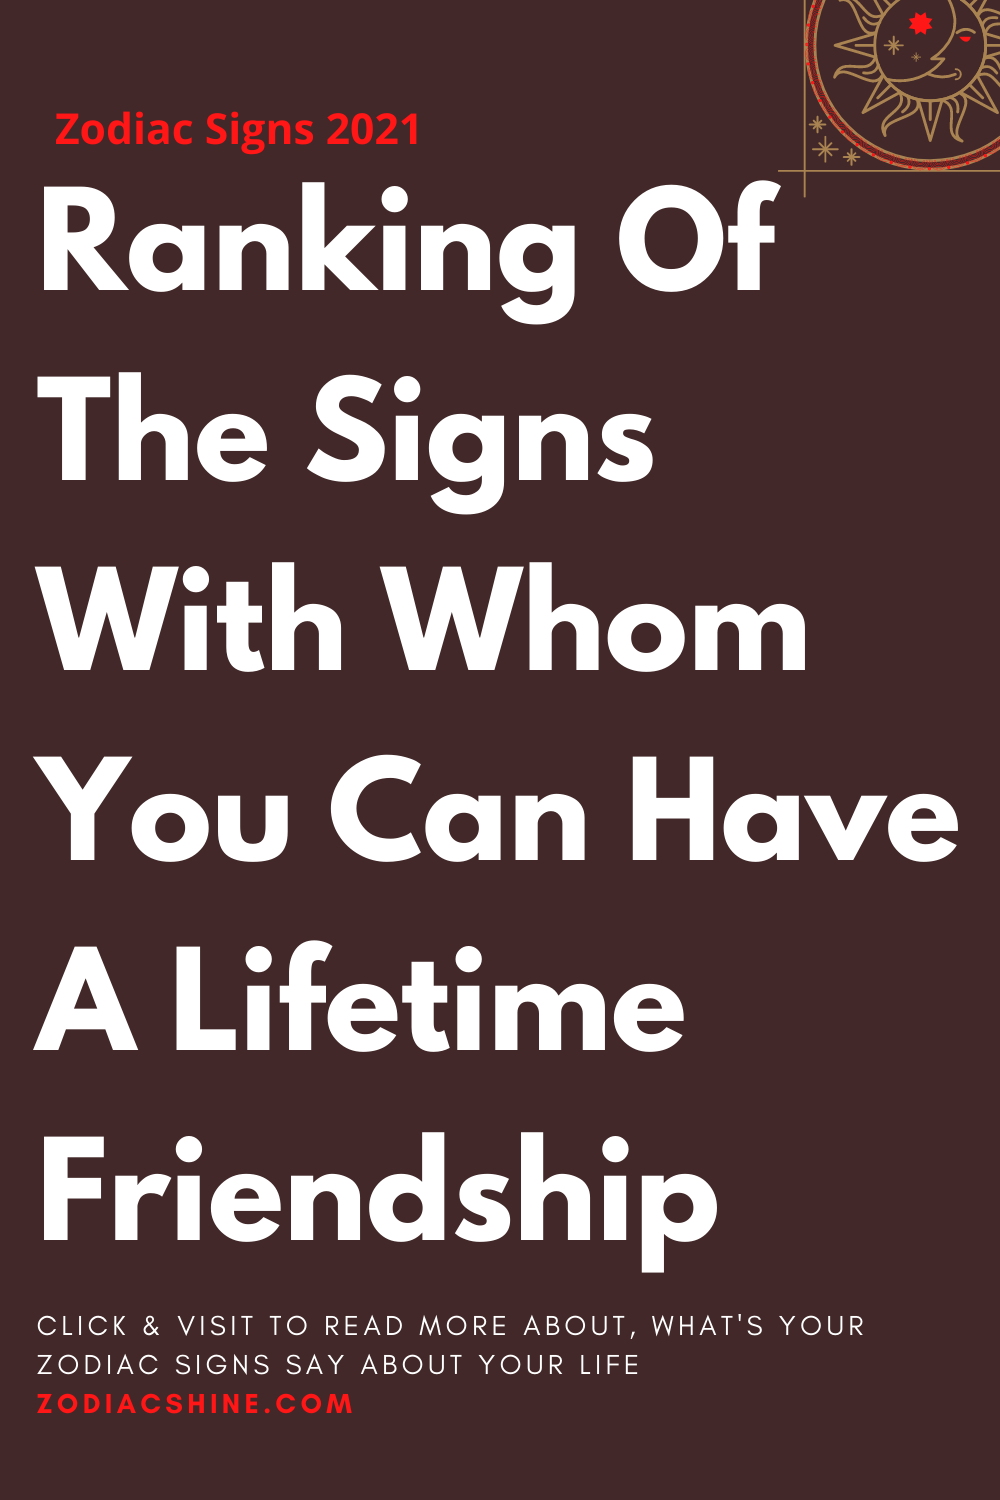 Ranking Of The Signs With Whom You Can Have A Lifetime Friendship